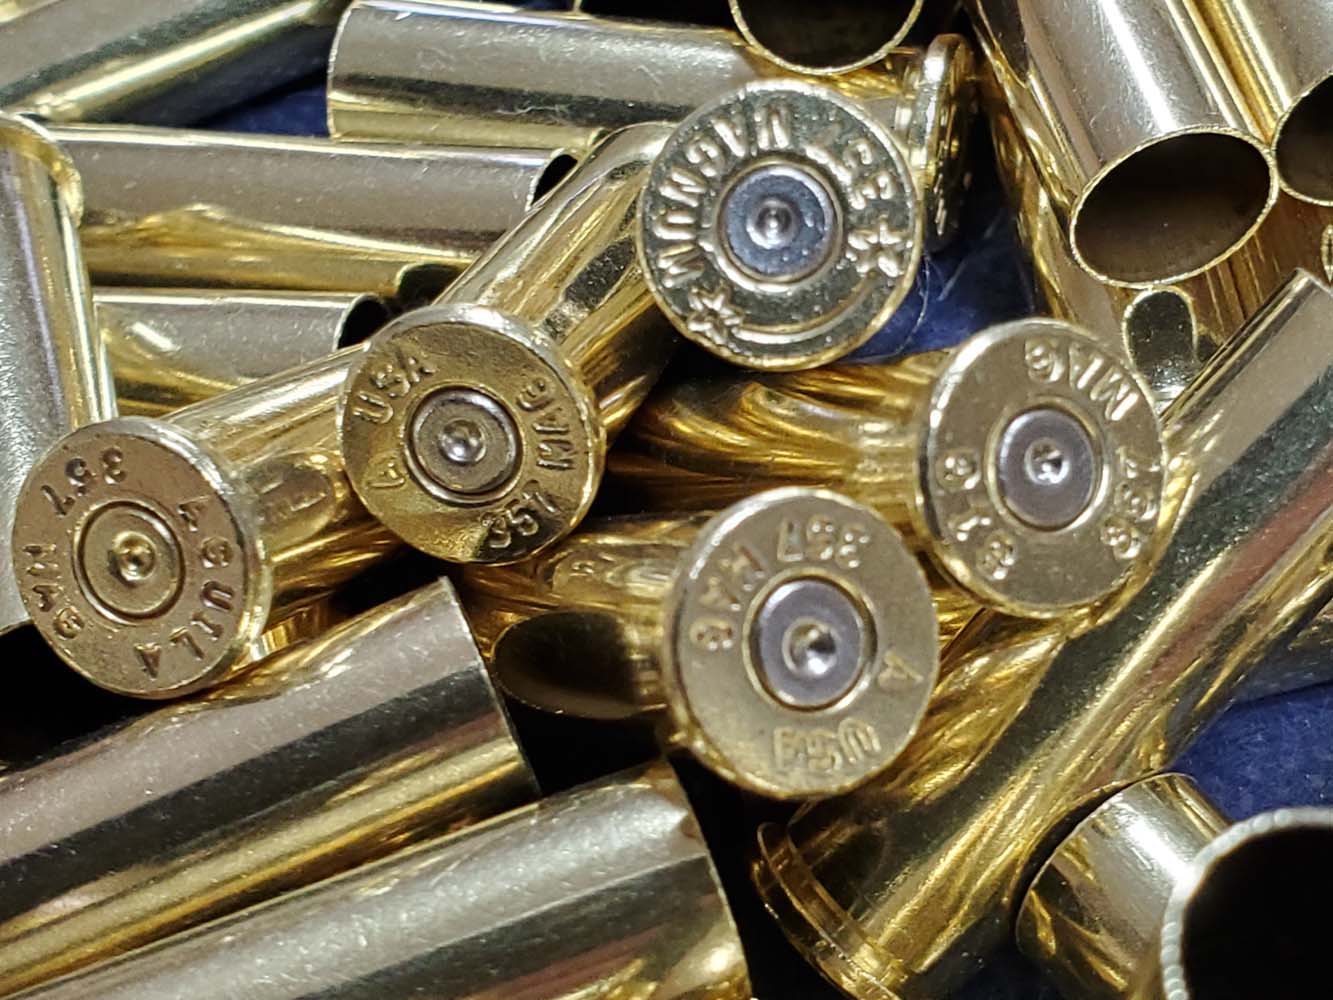 357 Magnum Once Fired Brass 230 Count - Once Fired Brass